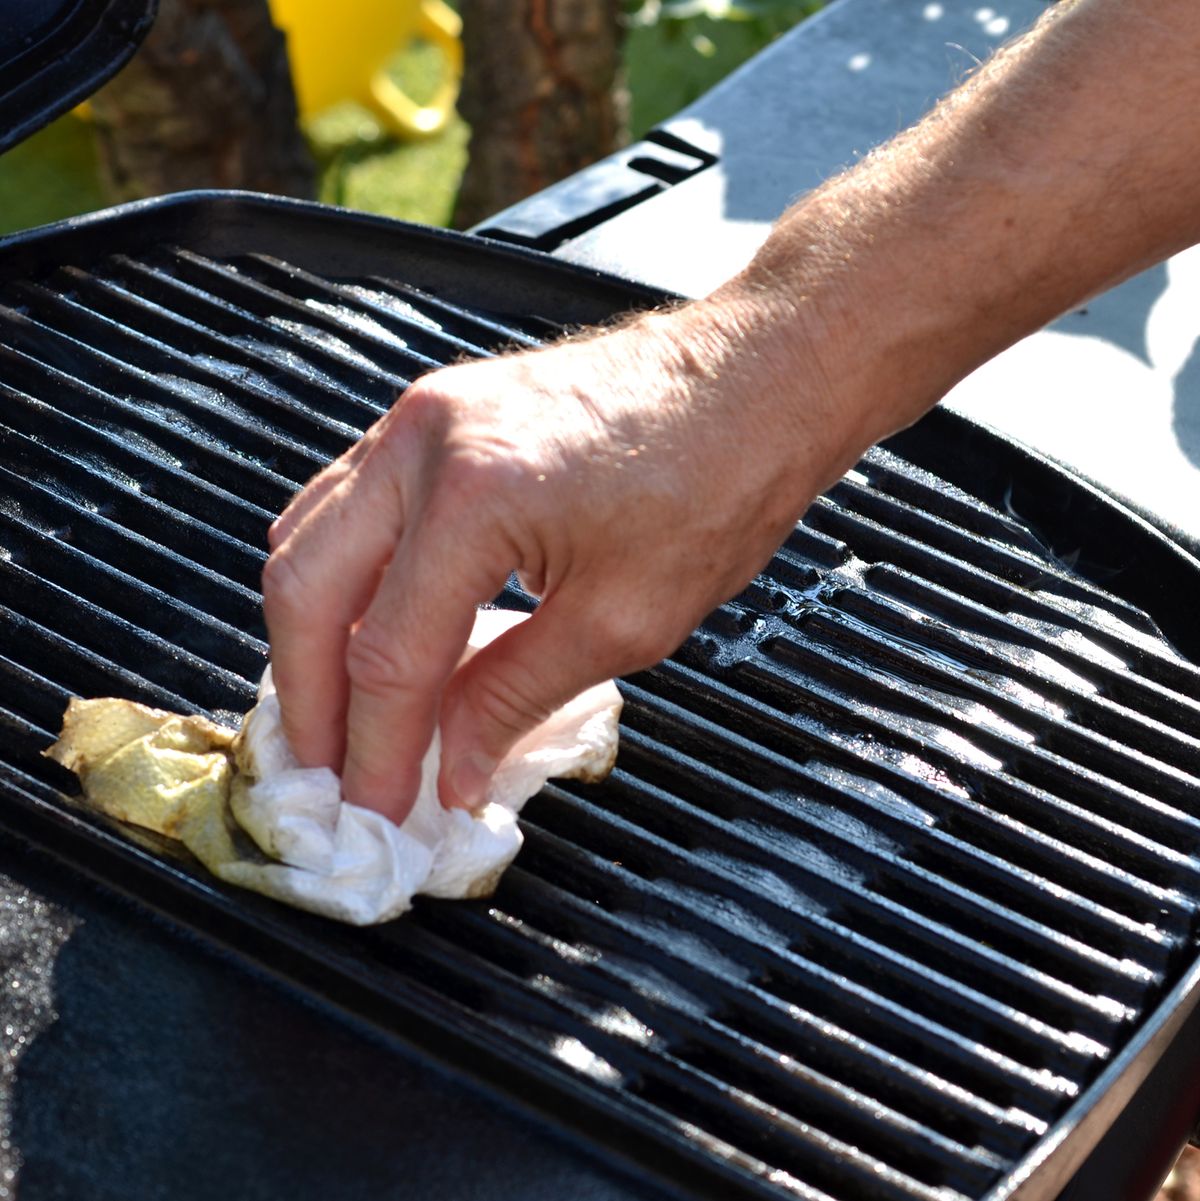 How to Clean a Grill | BBQ Cleaning Guide